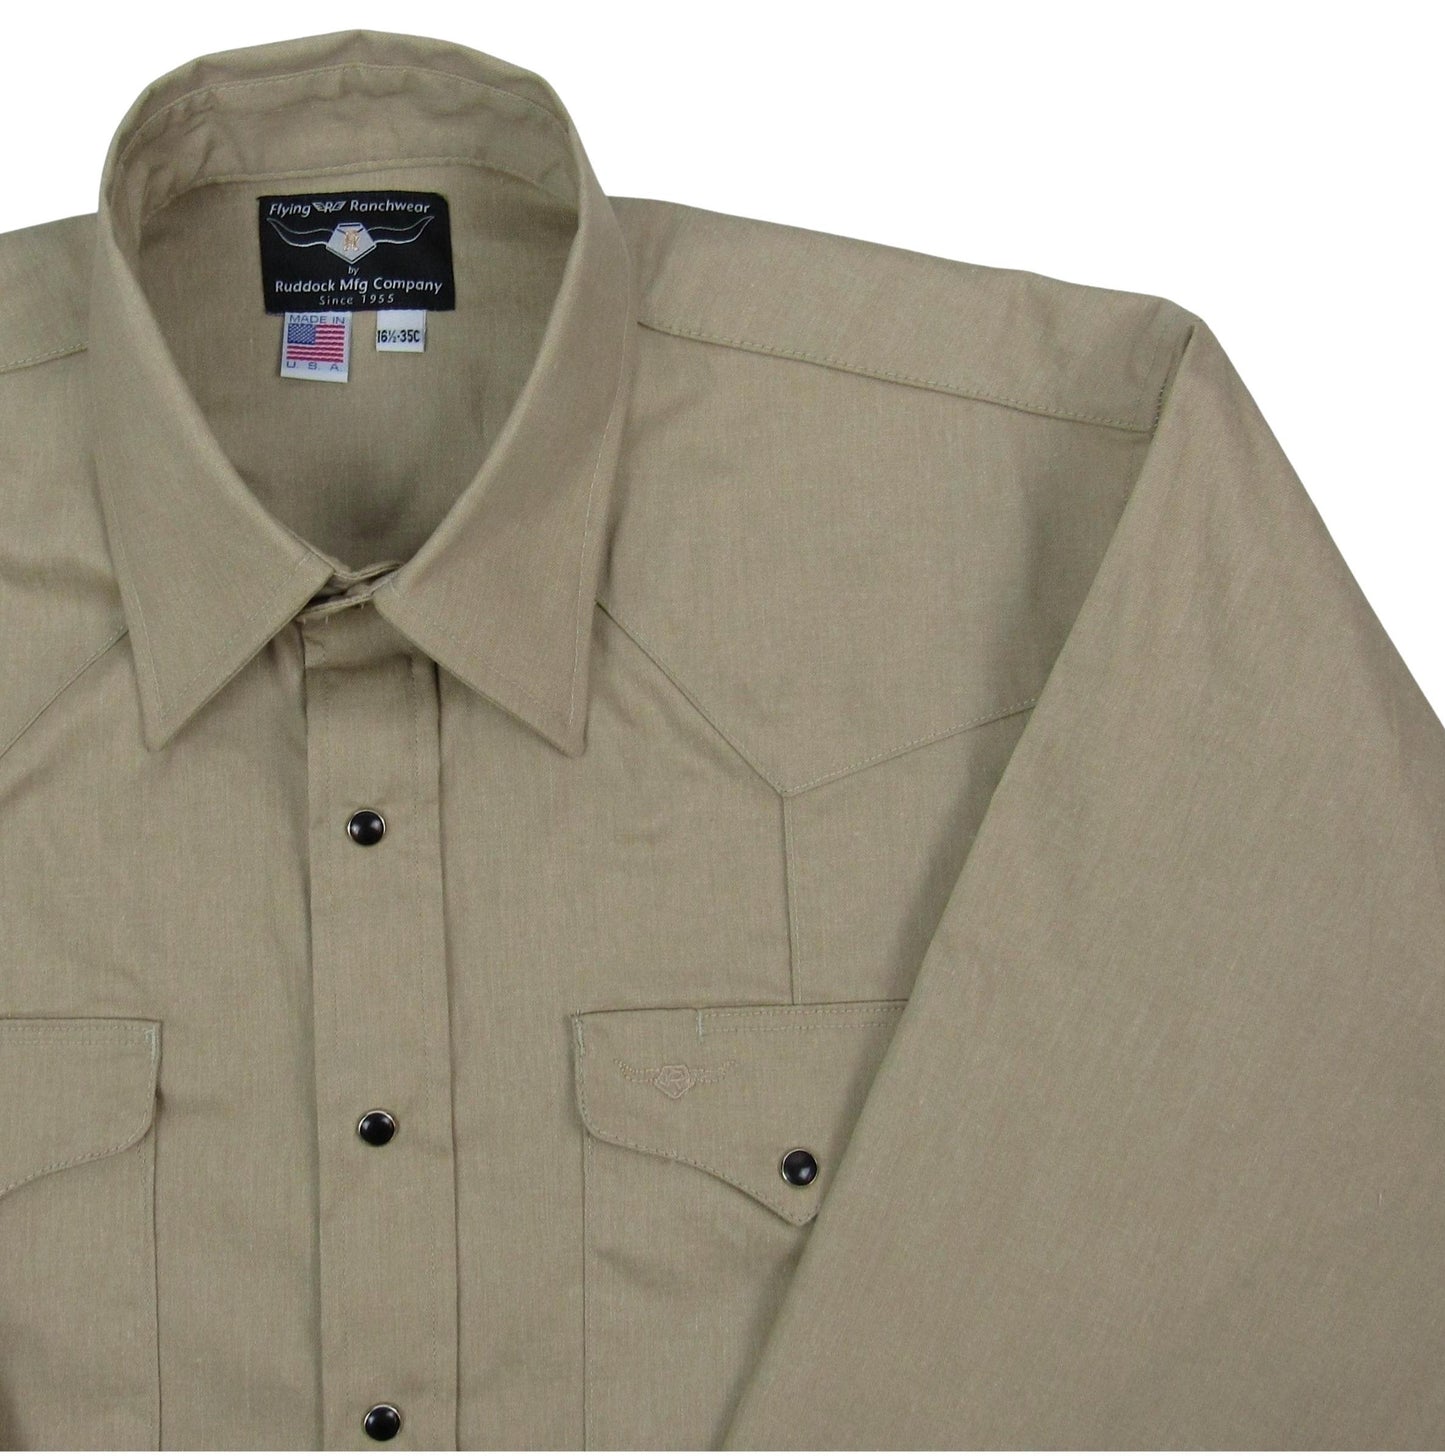 Factory Seconds - Slightly Irregular Shirts - Size Large or LT - 16/16.5 - From $19.95